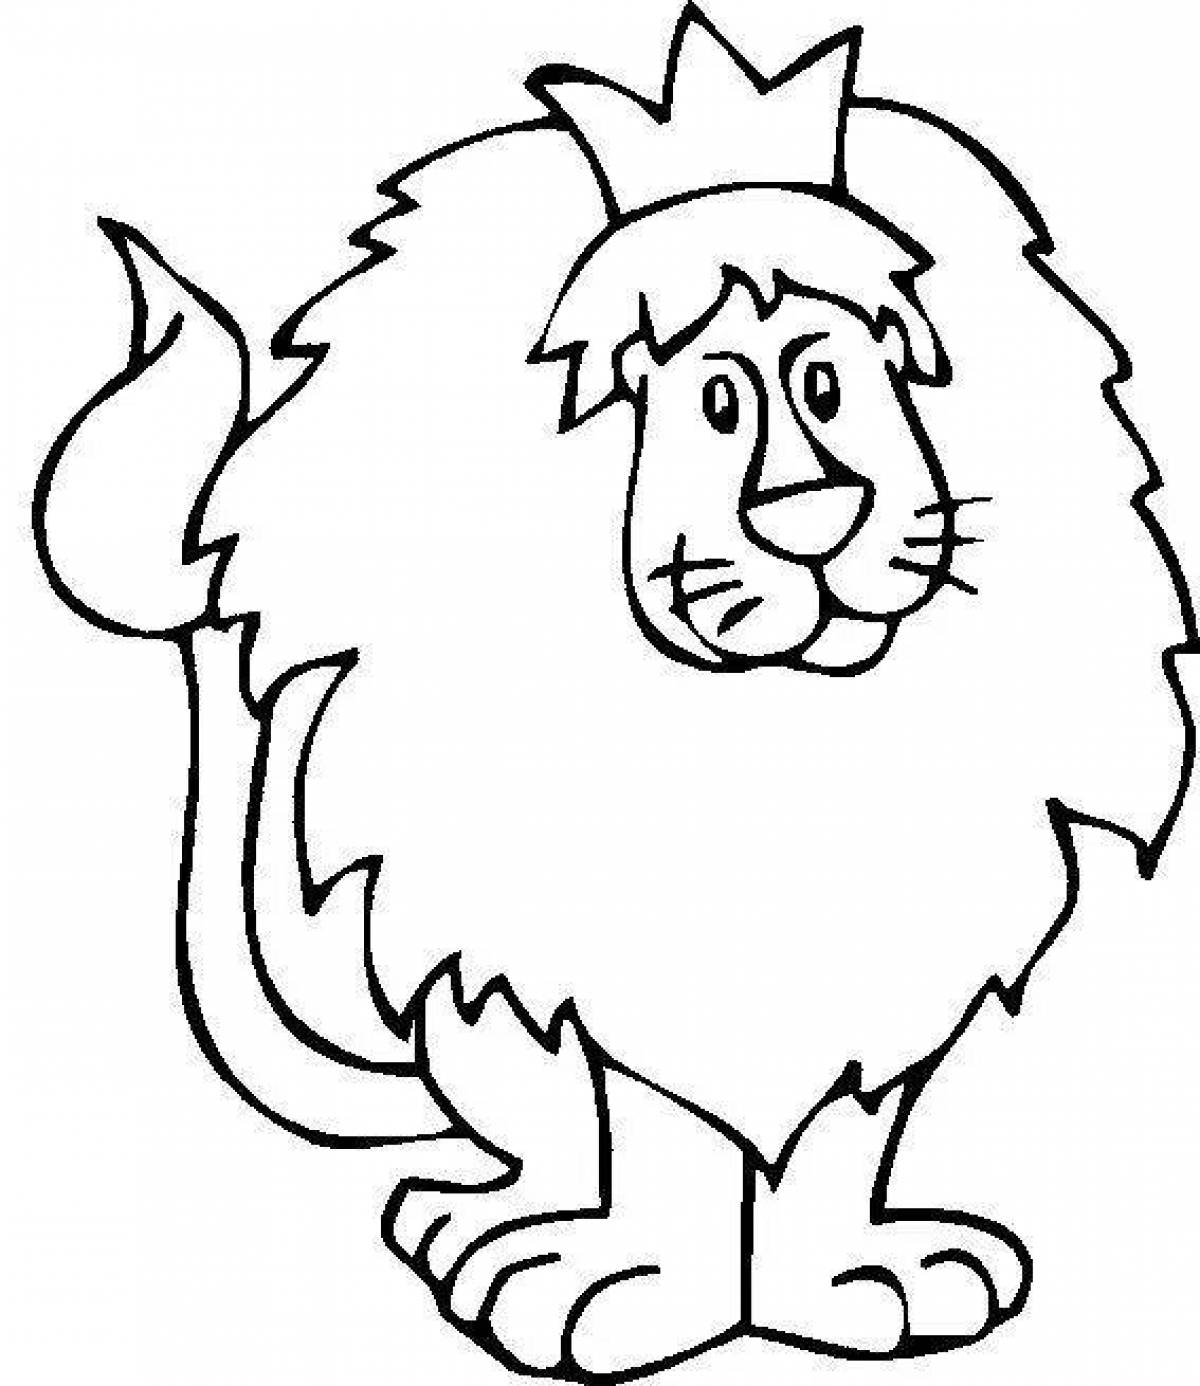 Dazzling lion coloring book for kids